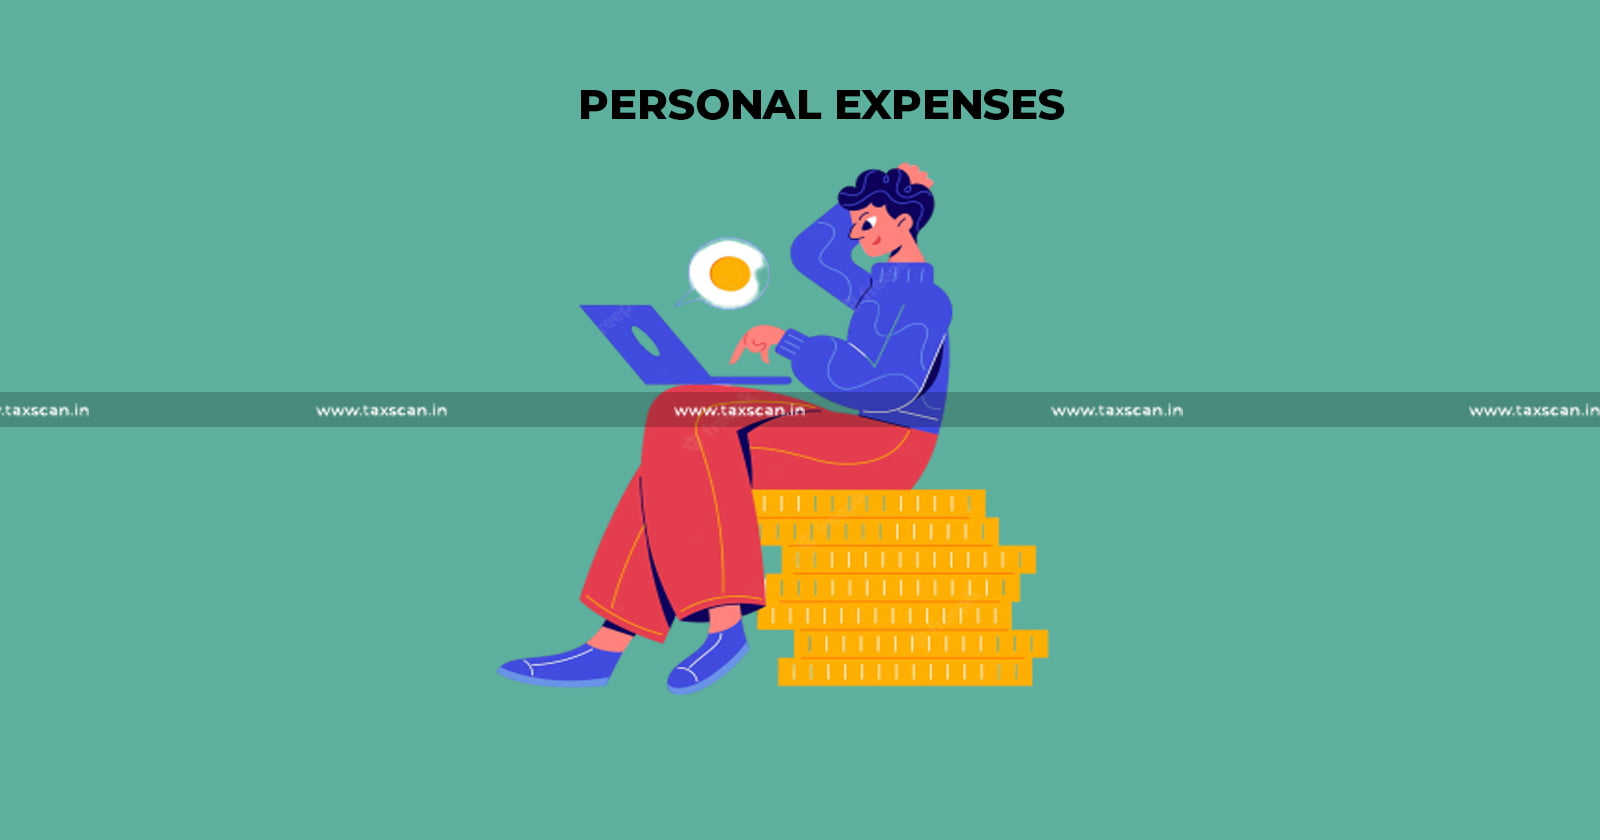 Deceased Person - Dependent - lives Separately - Delhi High Court - Deduction - personal expense - taxscan